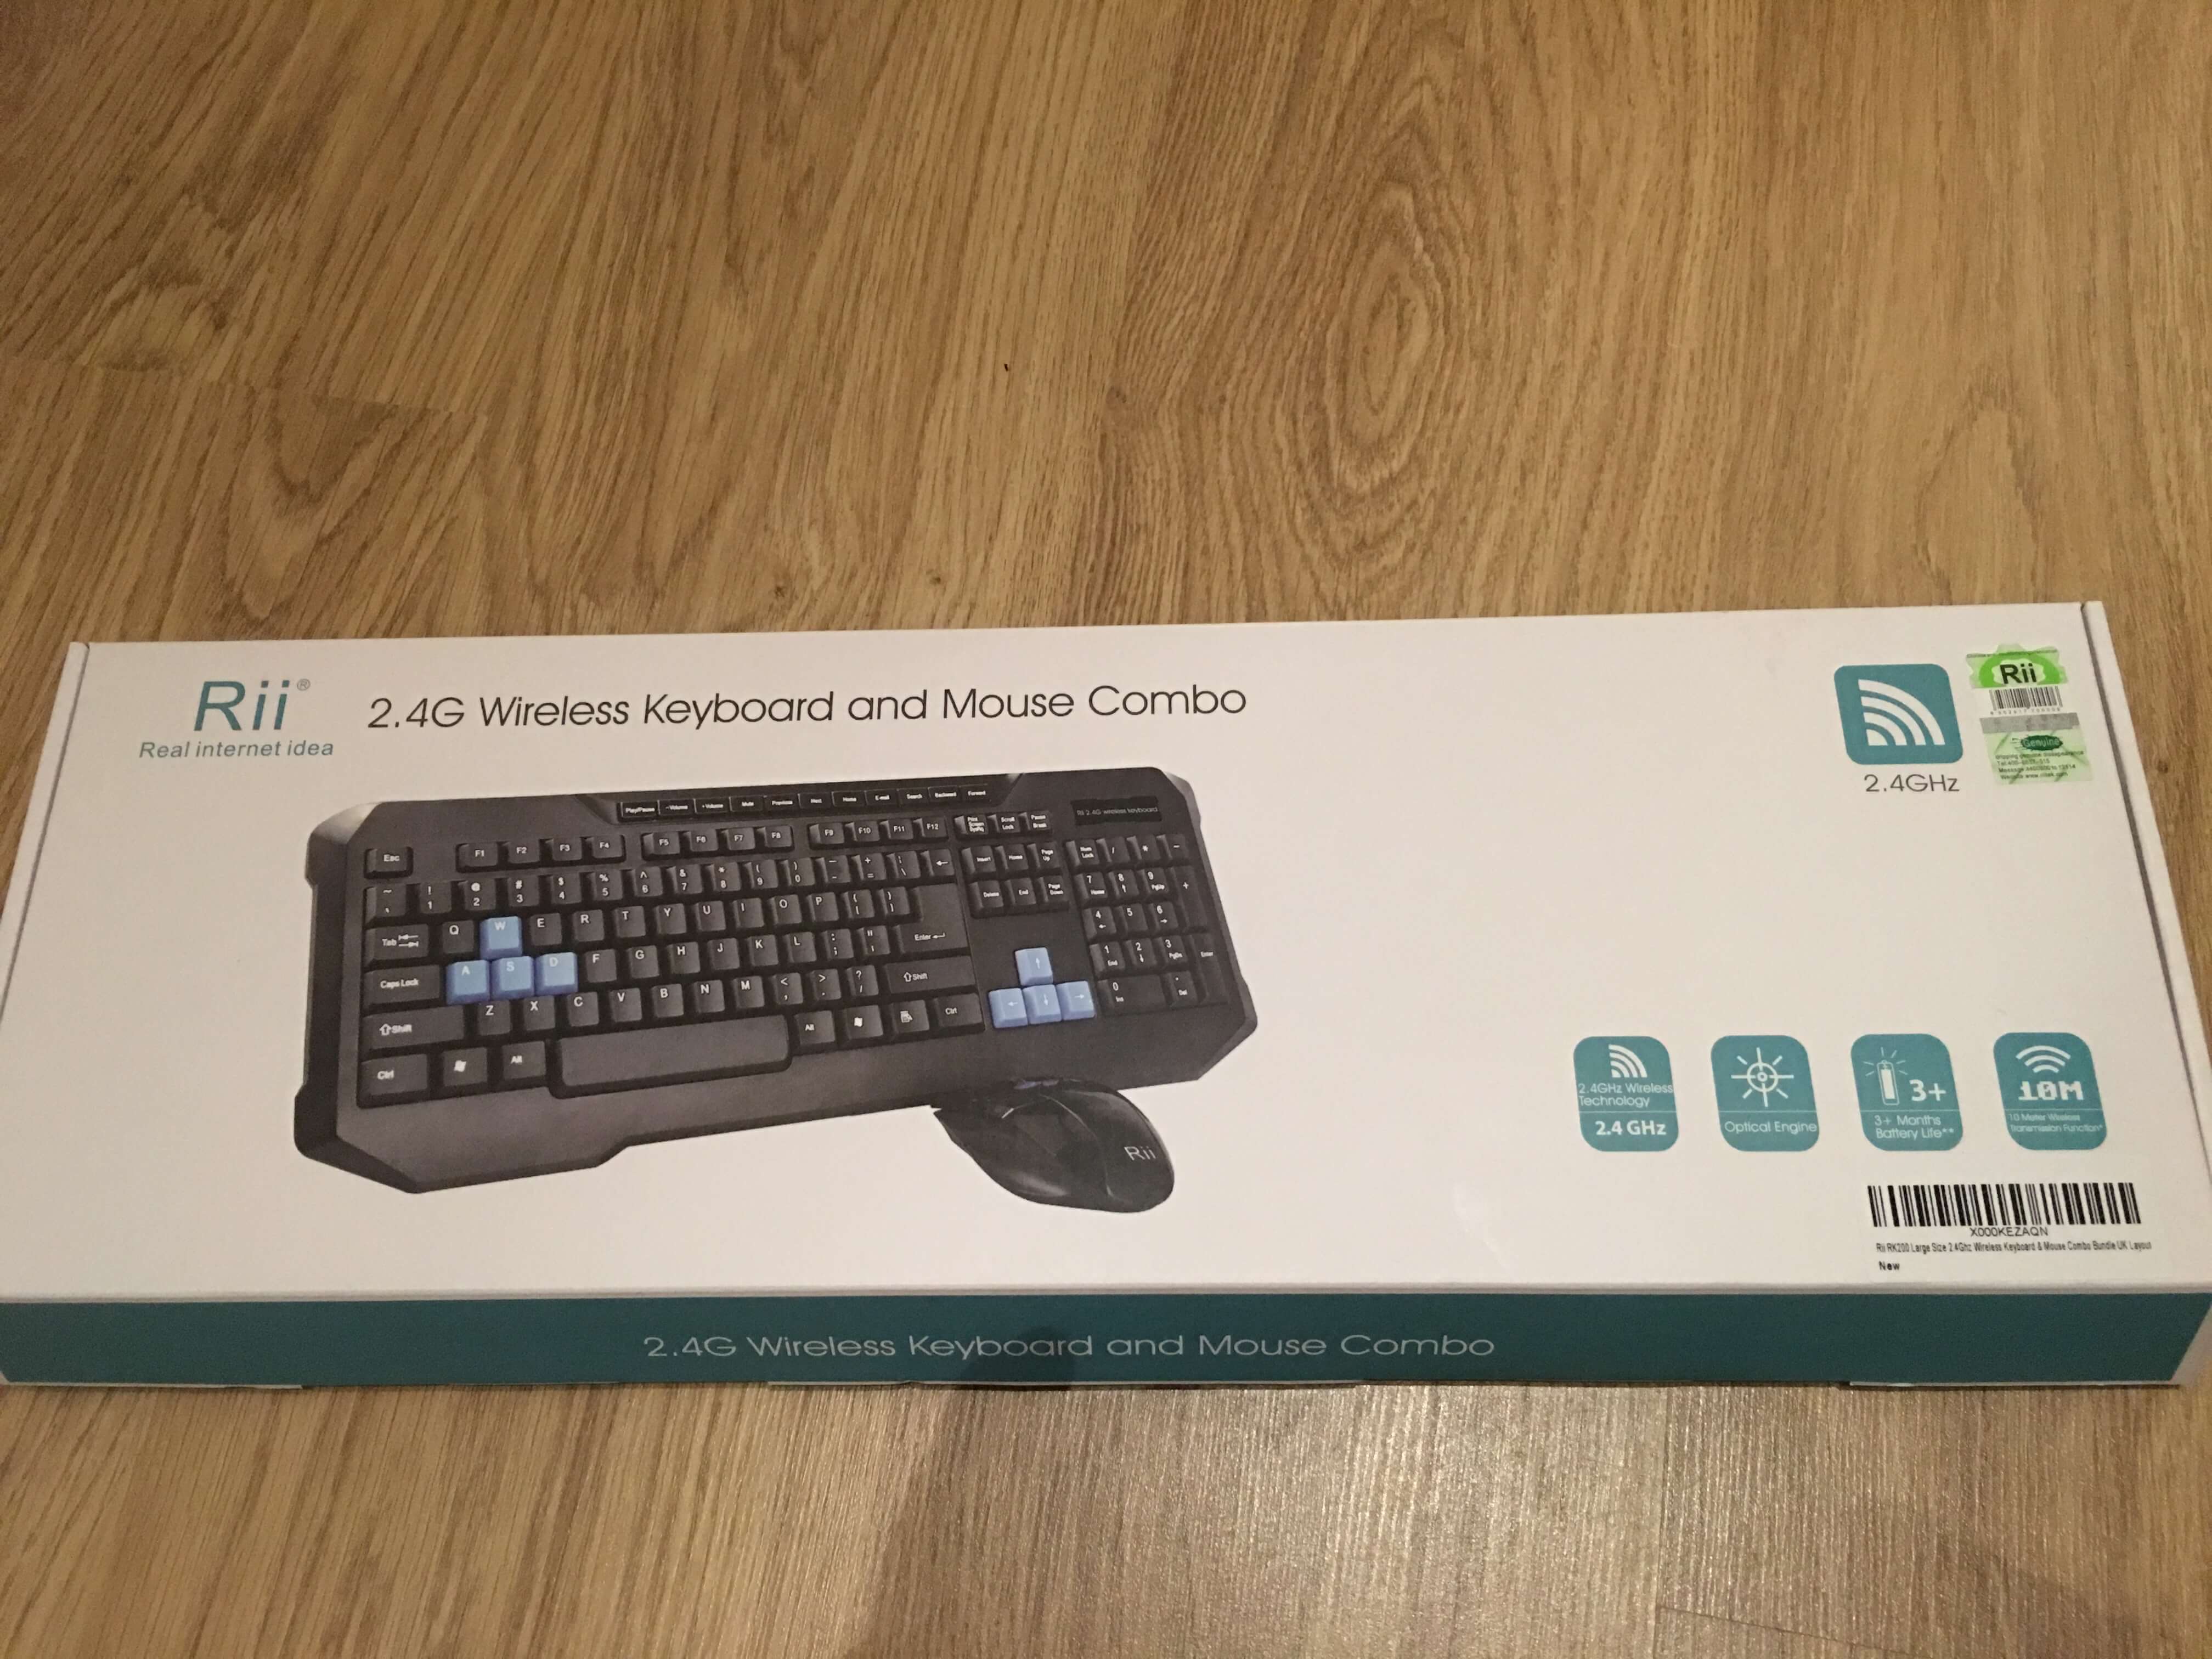 Rii 2.4G Wireless Keyboard and Mouse Combo Review